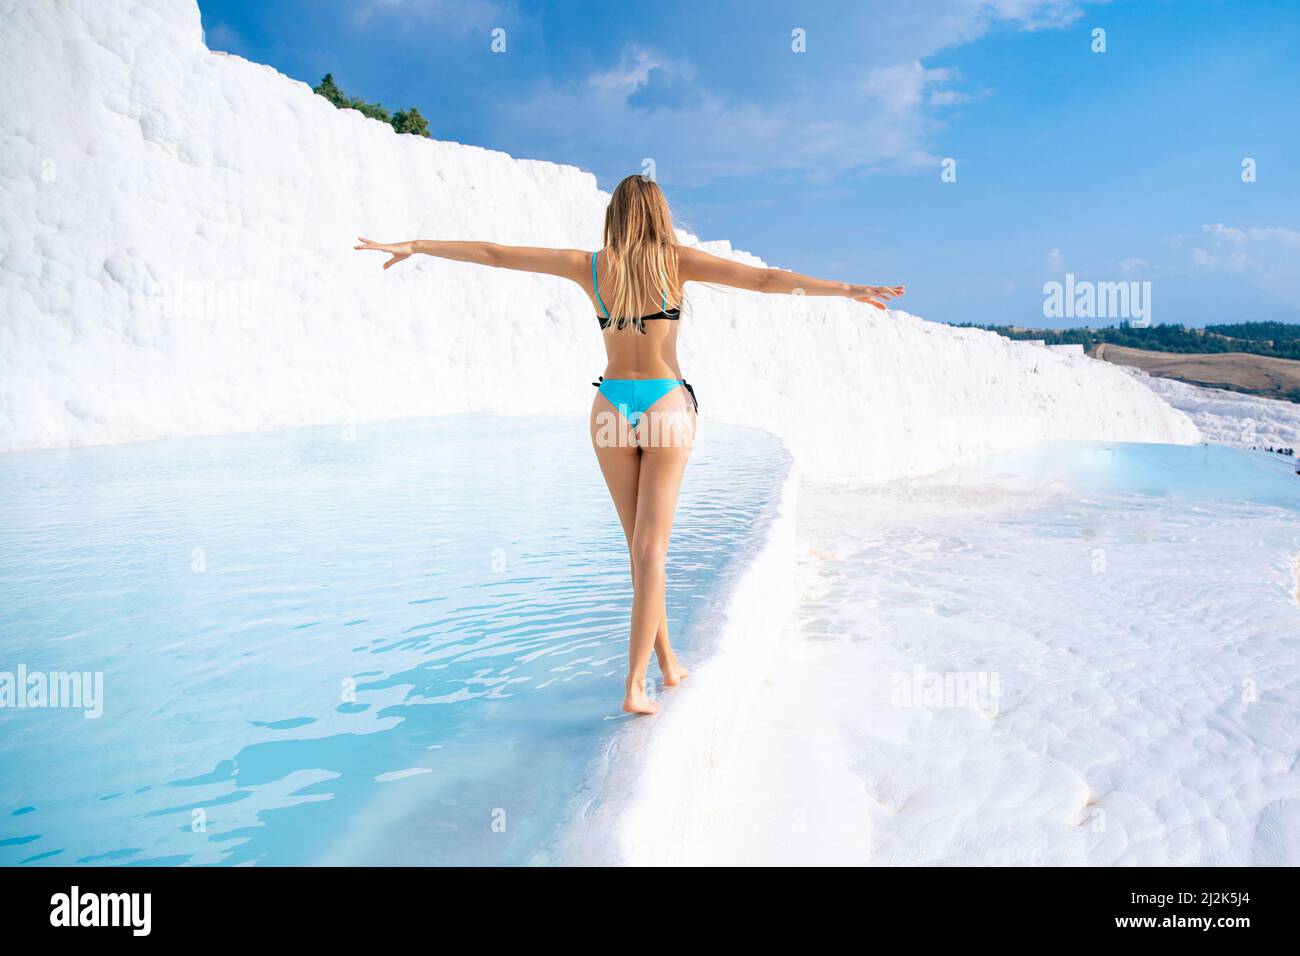 Pamukkale Turkey Tourist young woman in swimsuit background travertine pools blue water denizli. Concept natural spa treatment for skin. Stock Photo